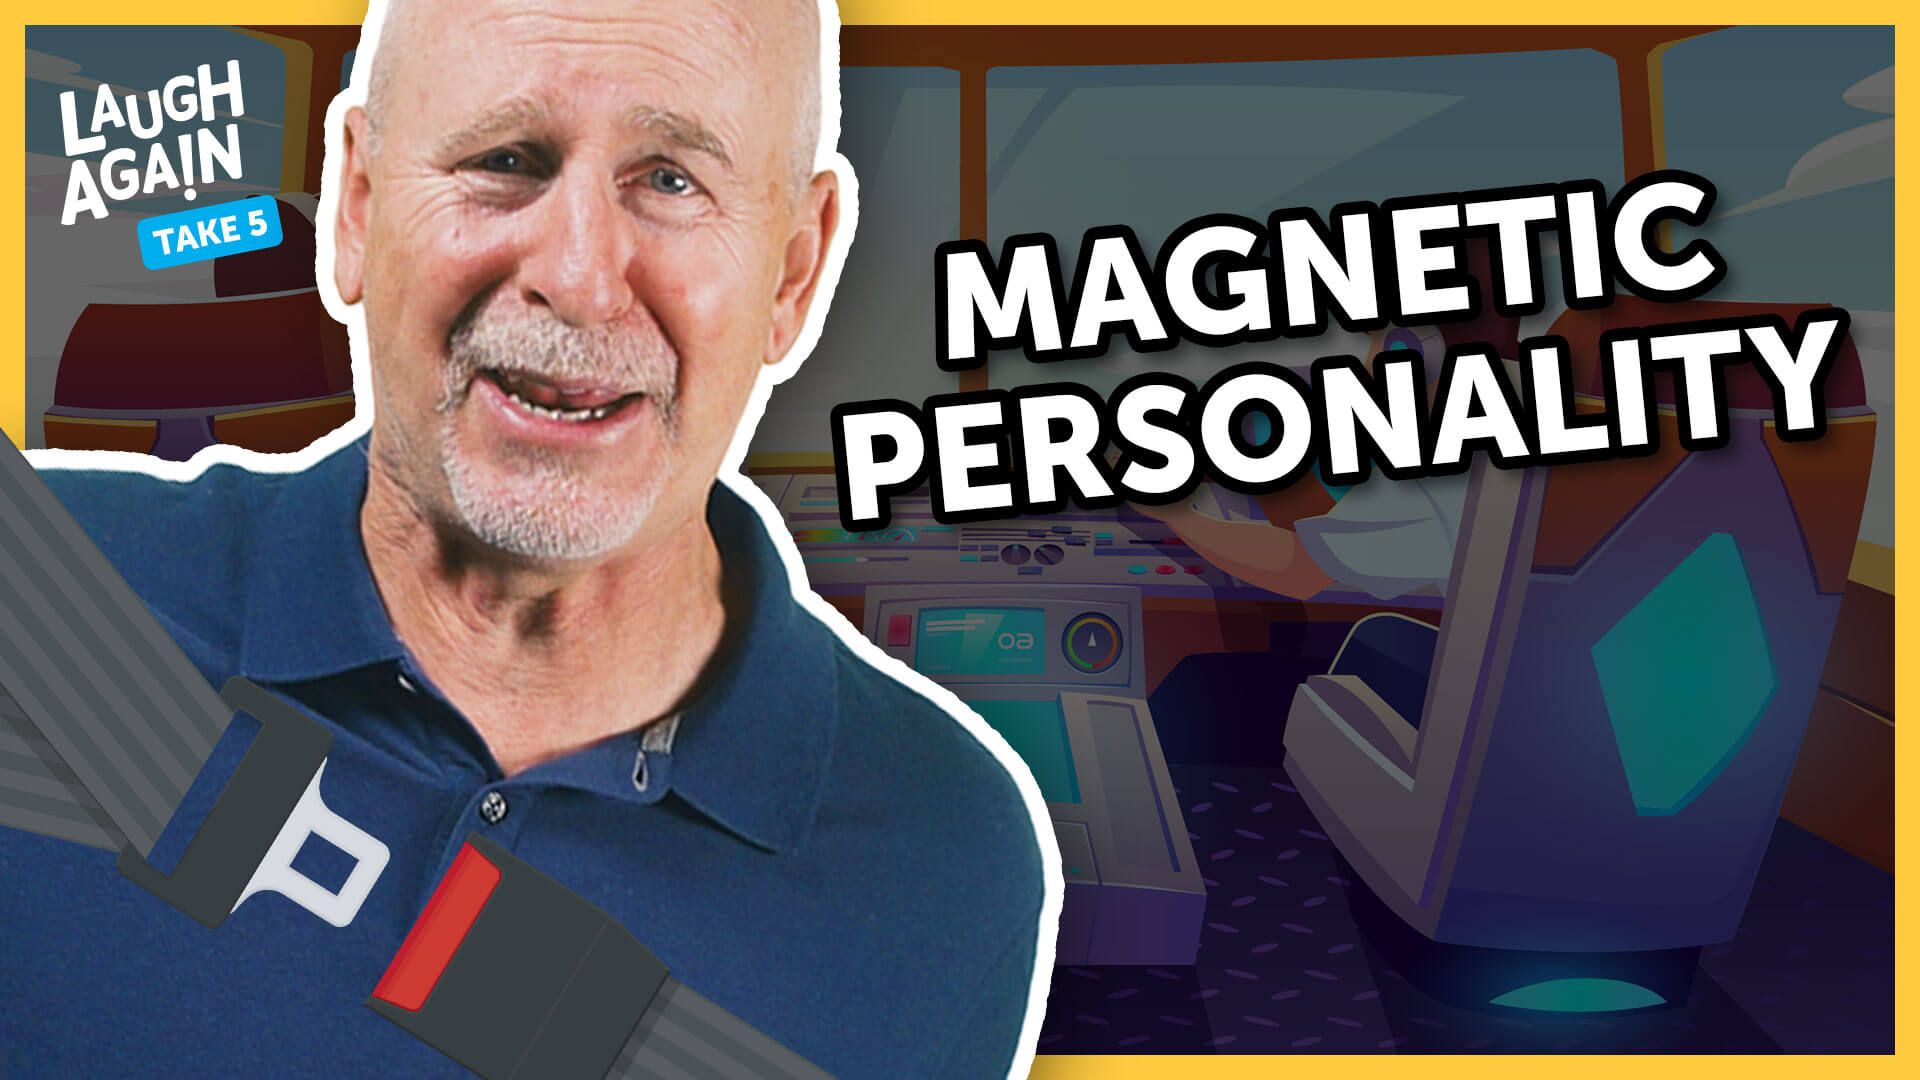 Magnetic Personality | Laugh Again Take 5 with Phil Callaway